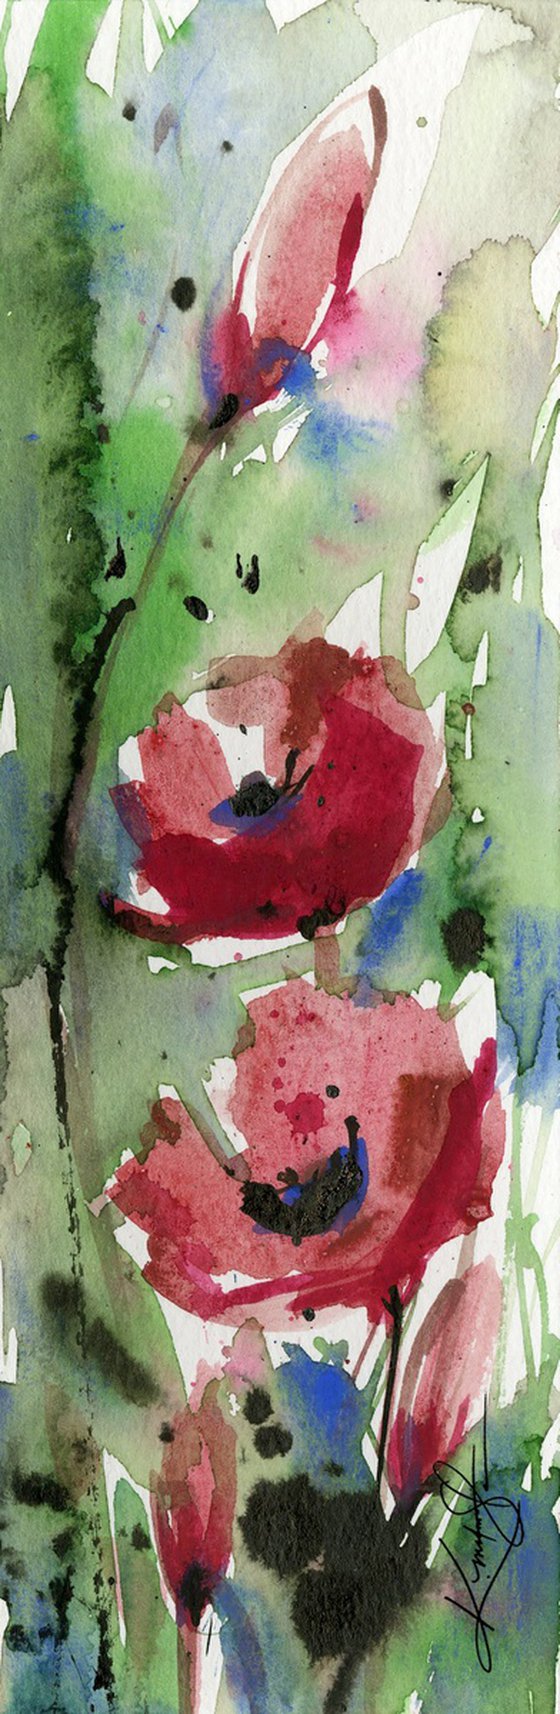 Poppy Love Collection 4 -  3 Watercolor Flower Paintings by Kathy Morton Stanion